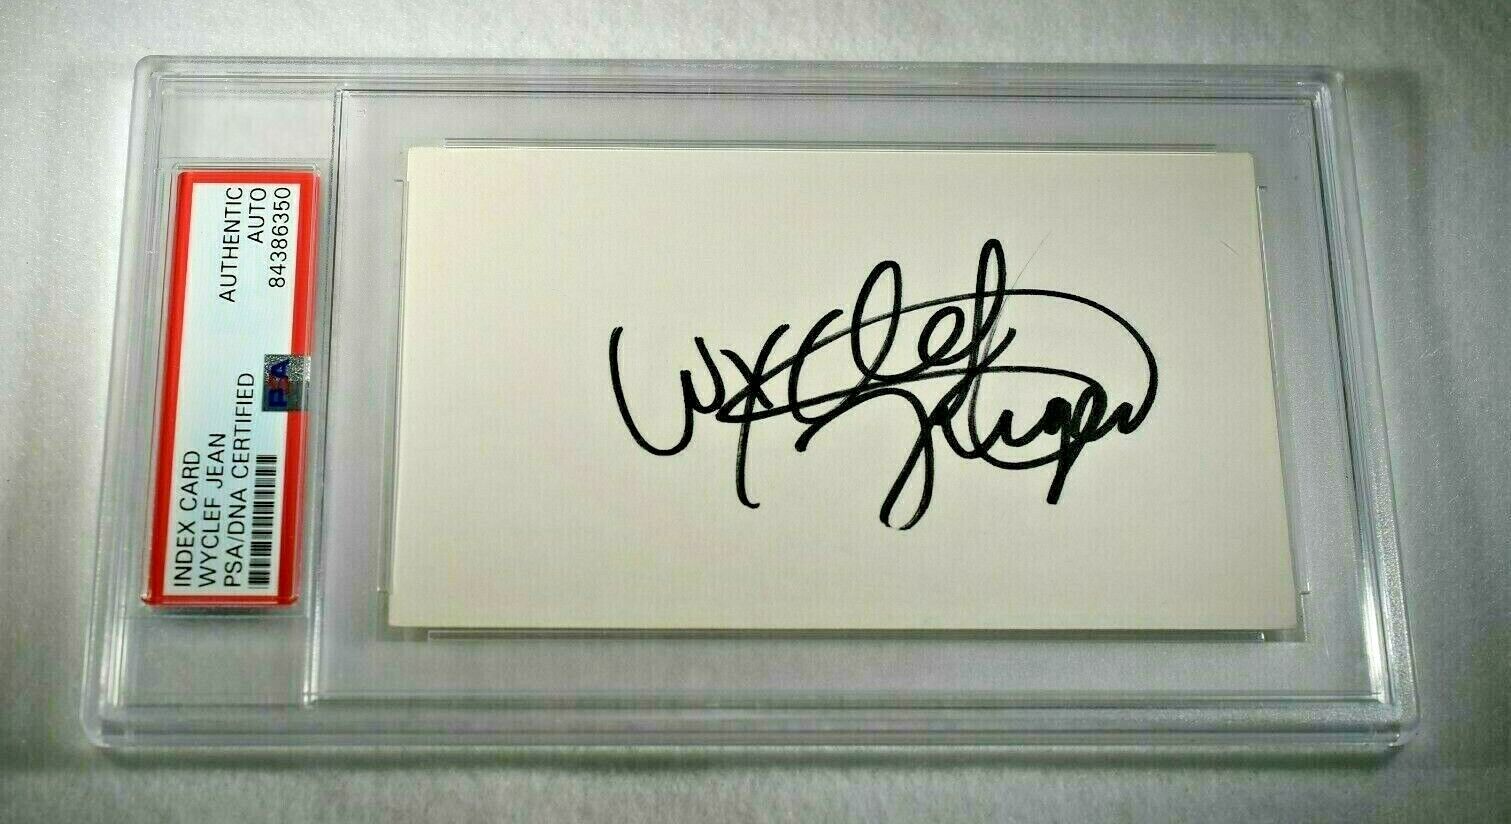 WYCLEF JEAN Signed 3x5 Index Card-Rapper-THE FUGEES-PSA Encapsulated